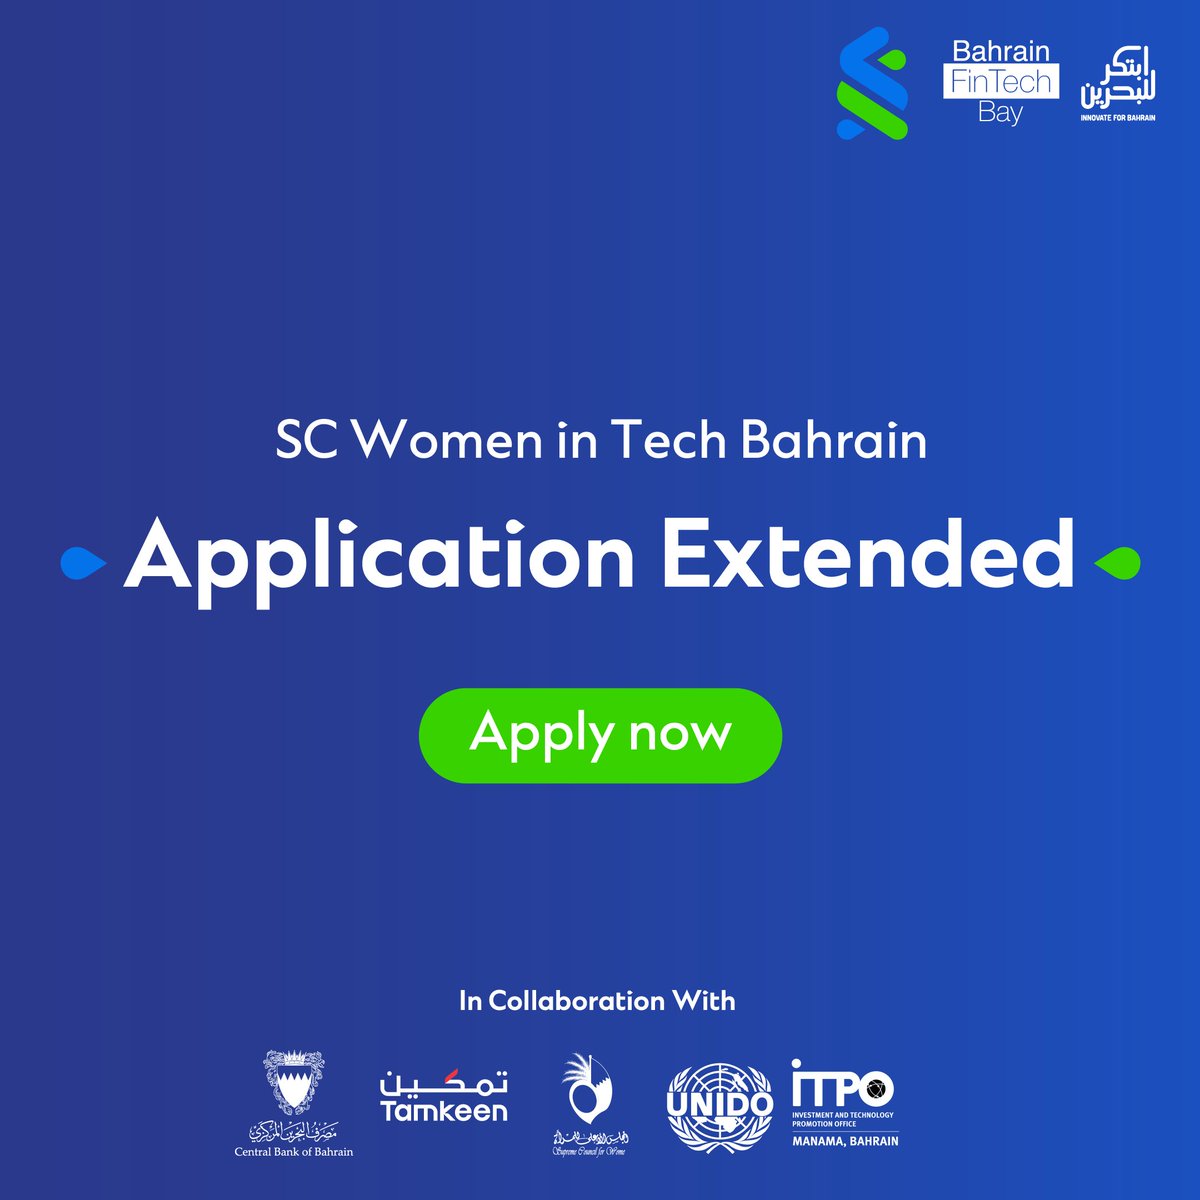 Last chance! We've extended the deadline for SC Women in Tech Program applications to next week. Female-led startups, don't miss out on winning equity-free prize money and a 3-month residency at Bahrain FinTech Bay.

Apply now:
ow.ly/3C5S50RqmNv

#FinTechBay #SCWomenInTech